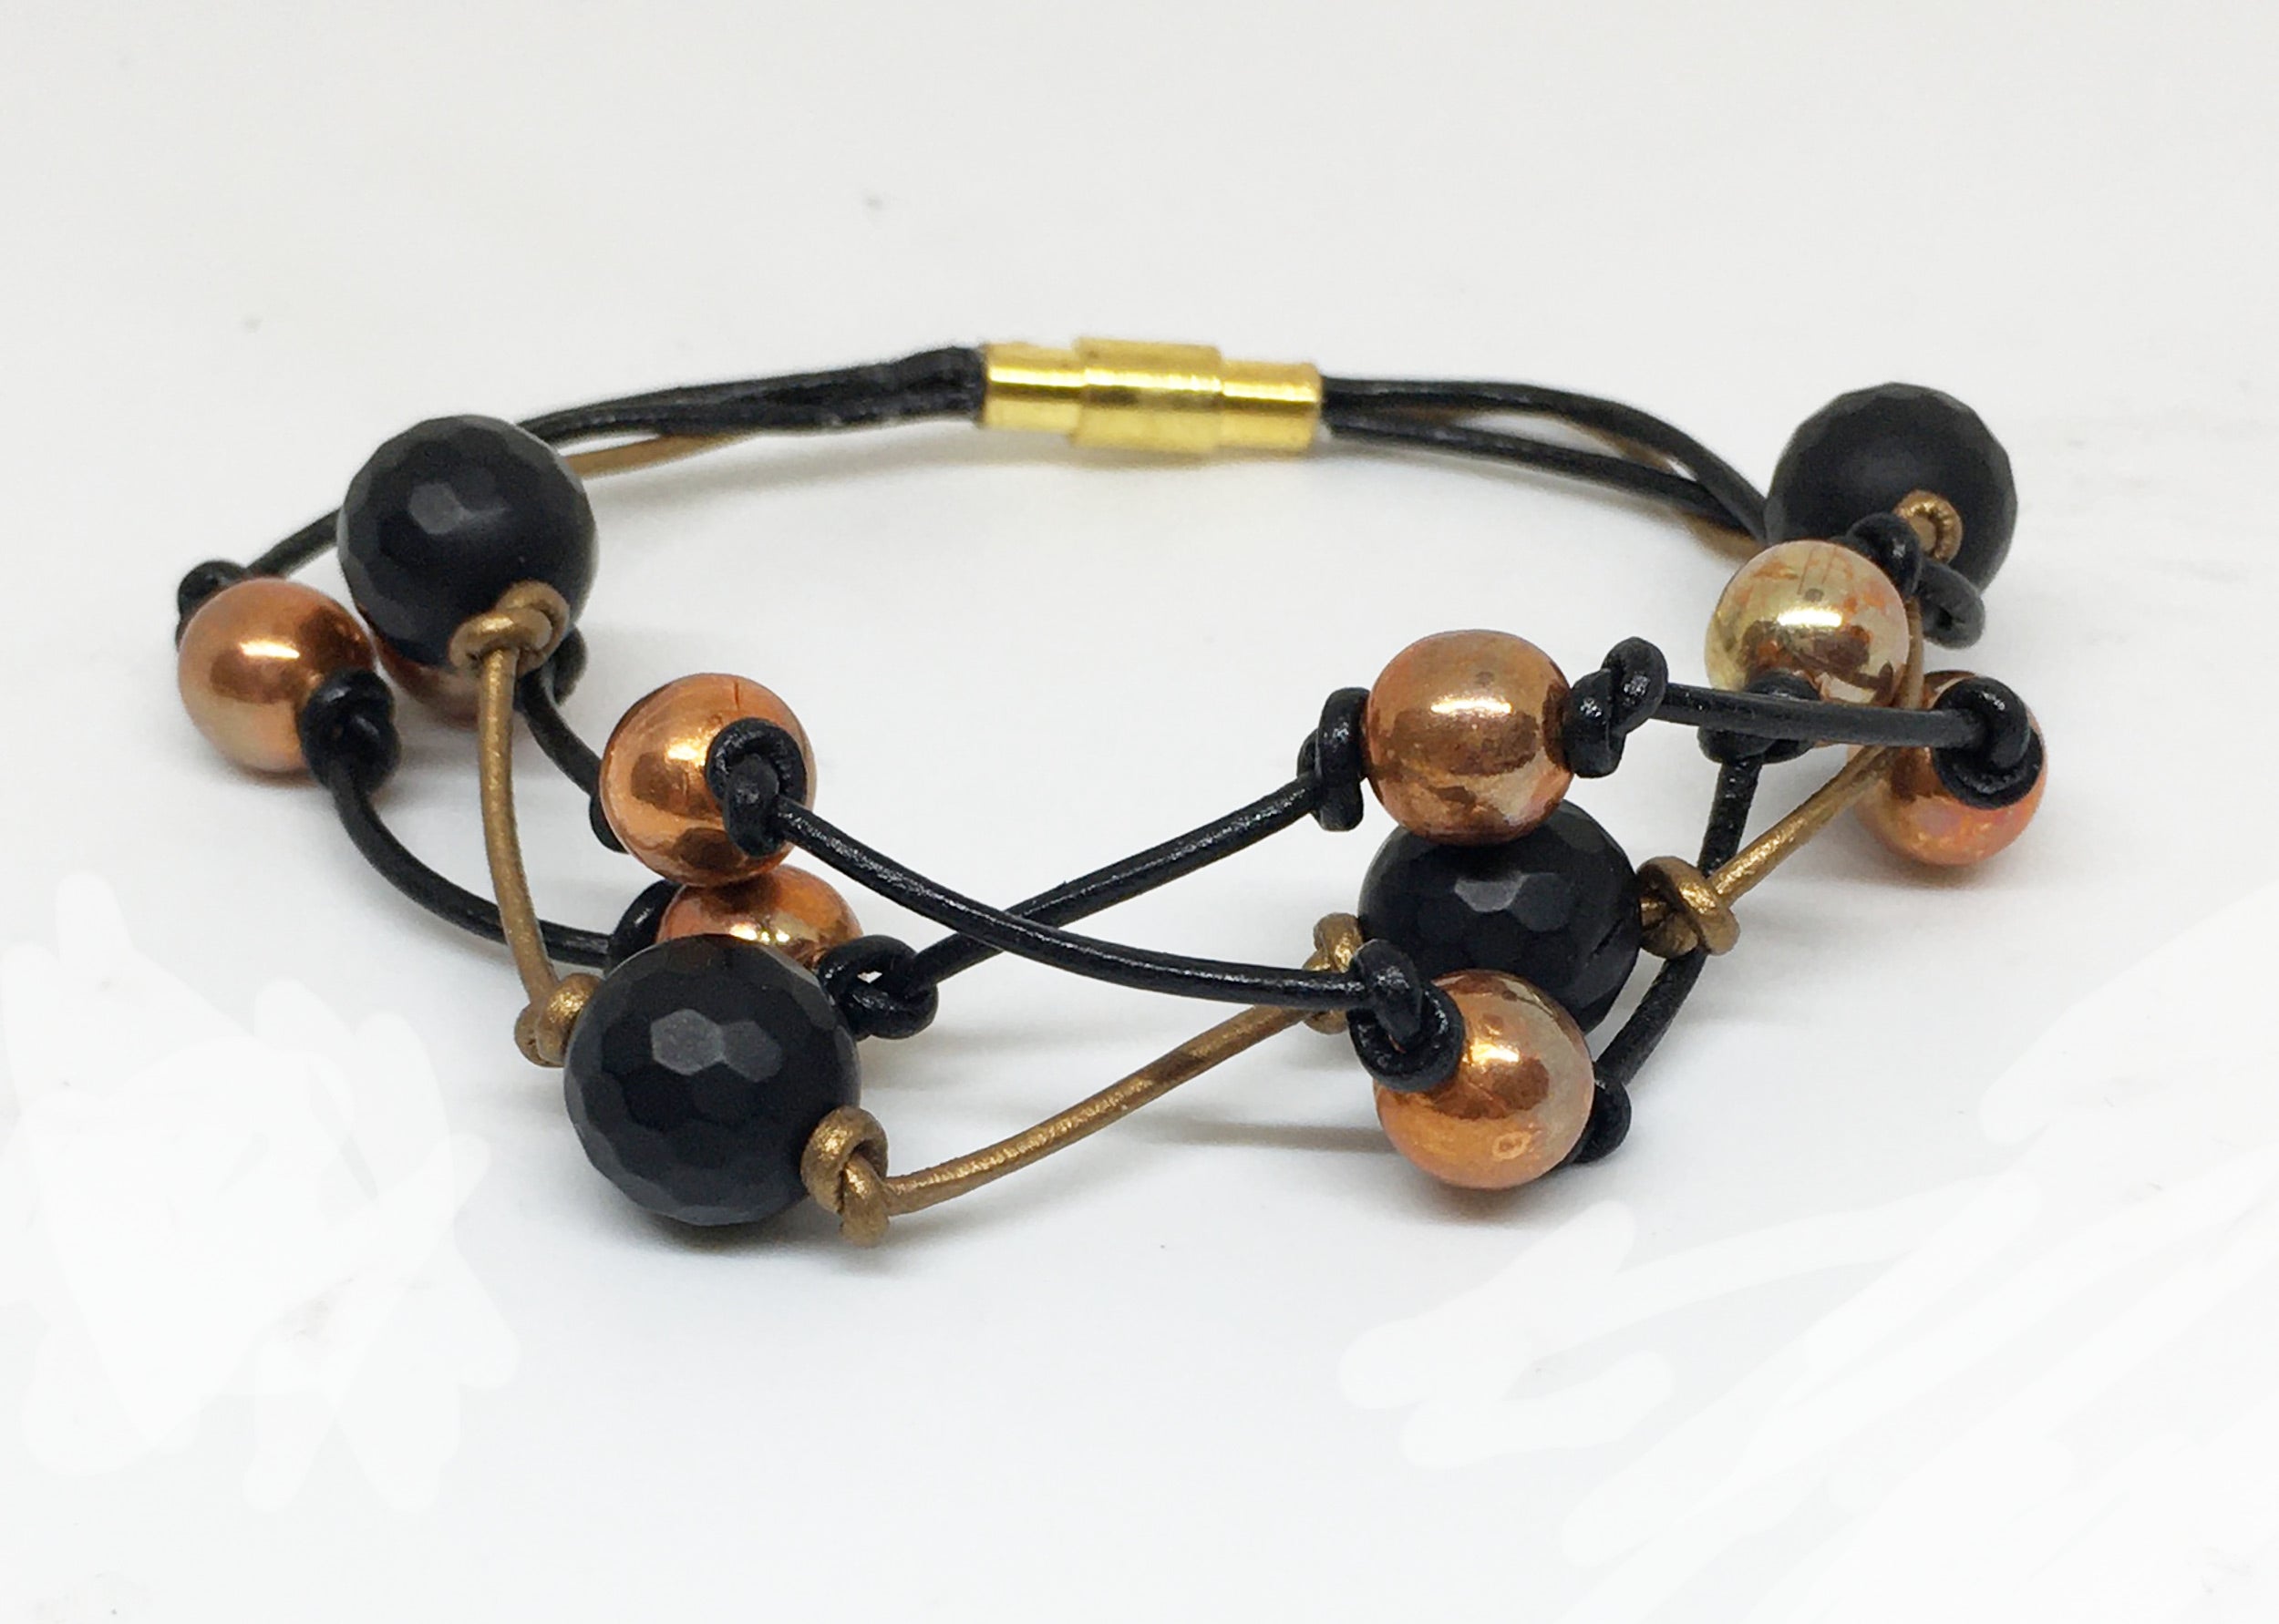 Flame Painted Copper Bead and Onyx Triple Strand Leather Bracelet